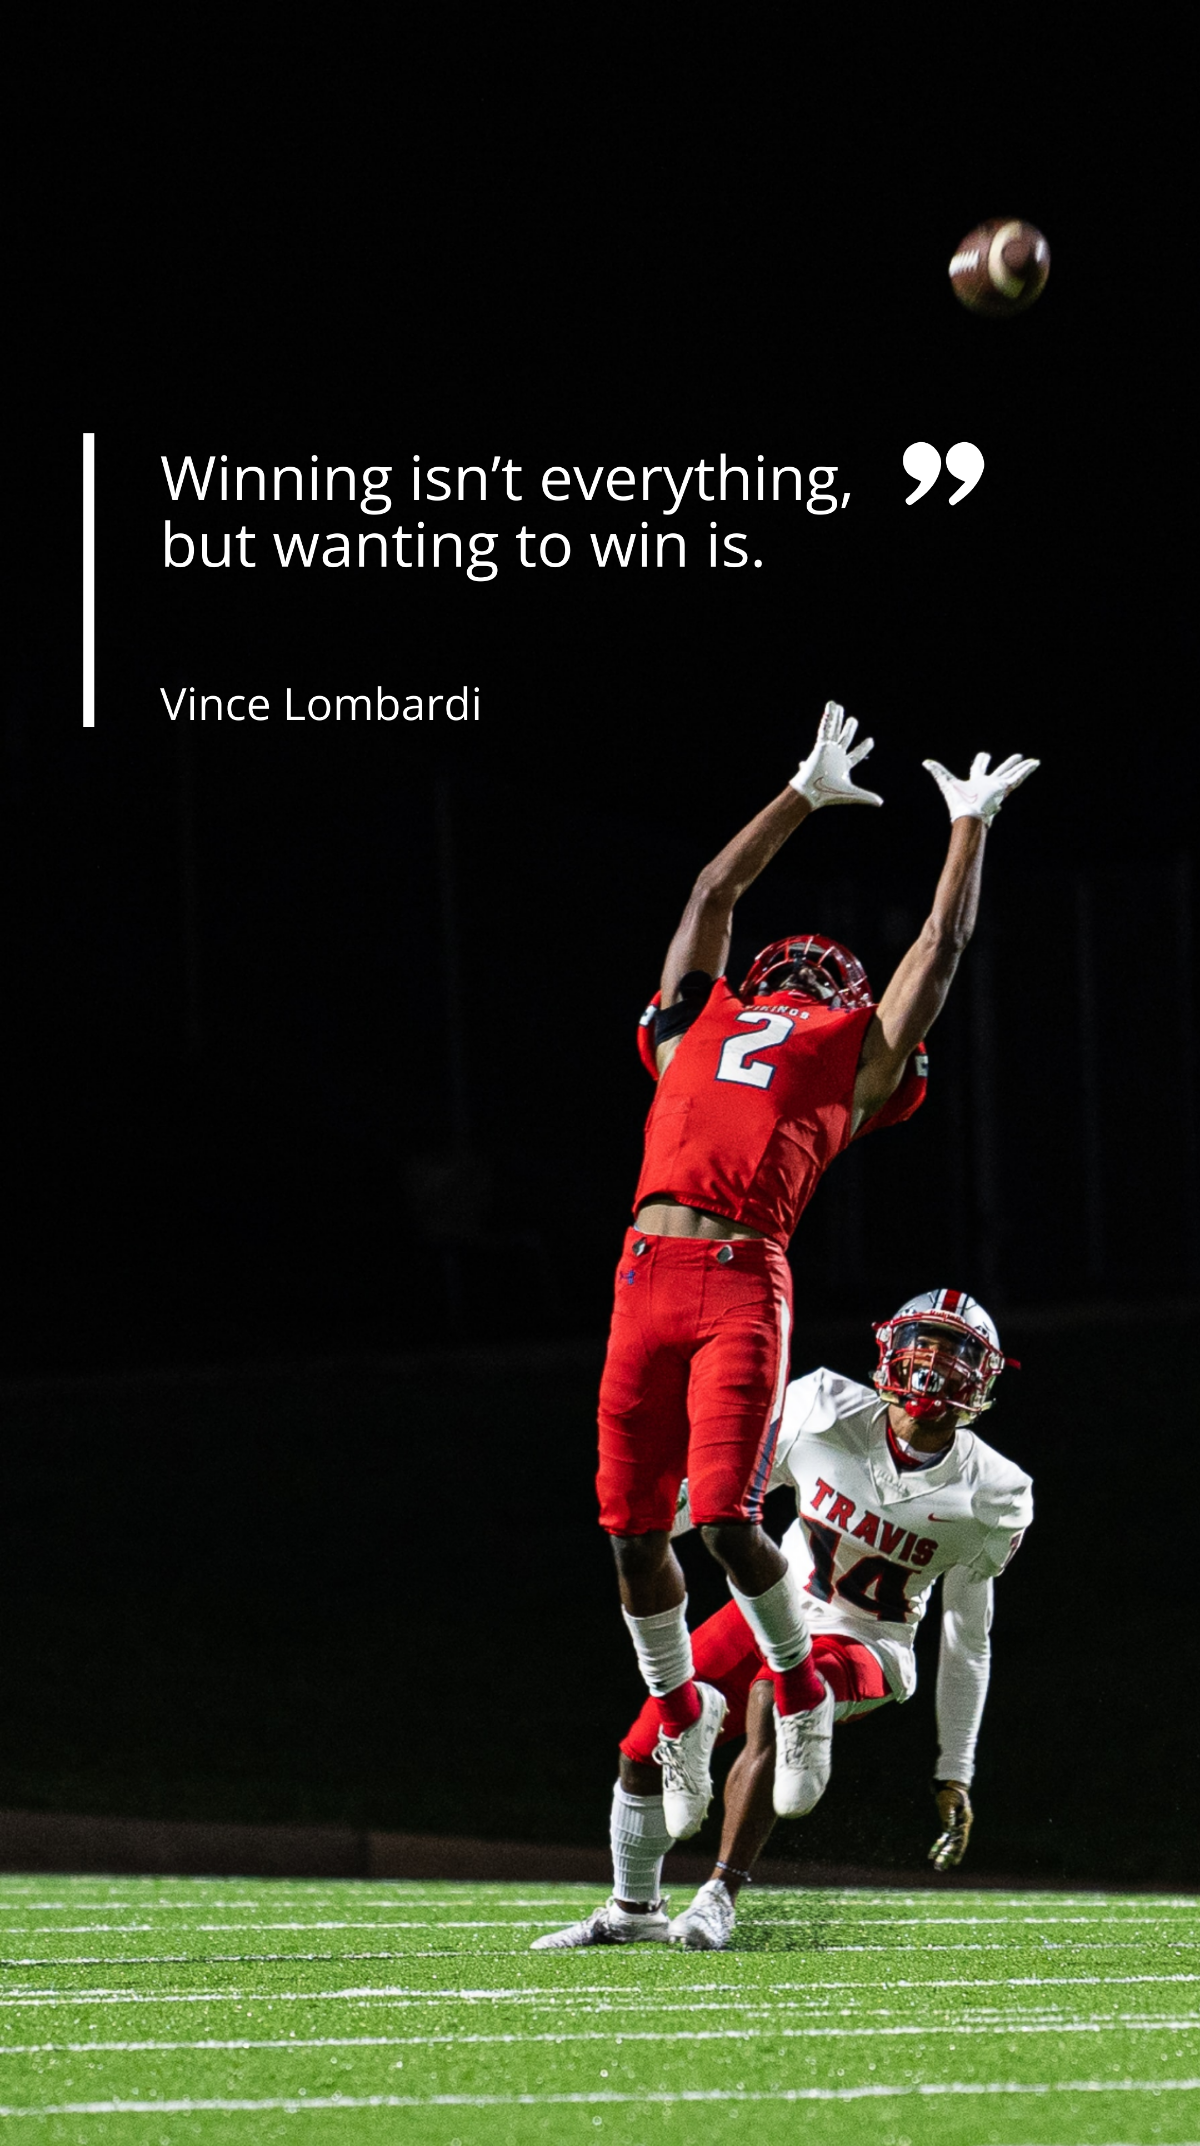 Vince Lombardi - Winning isn’t everything, but wanting to win is Template